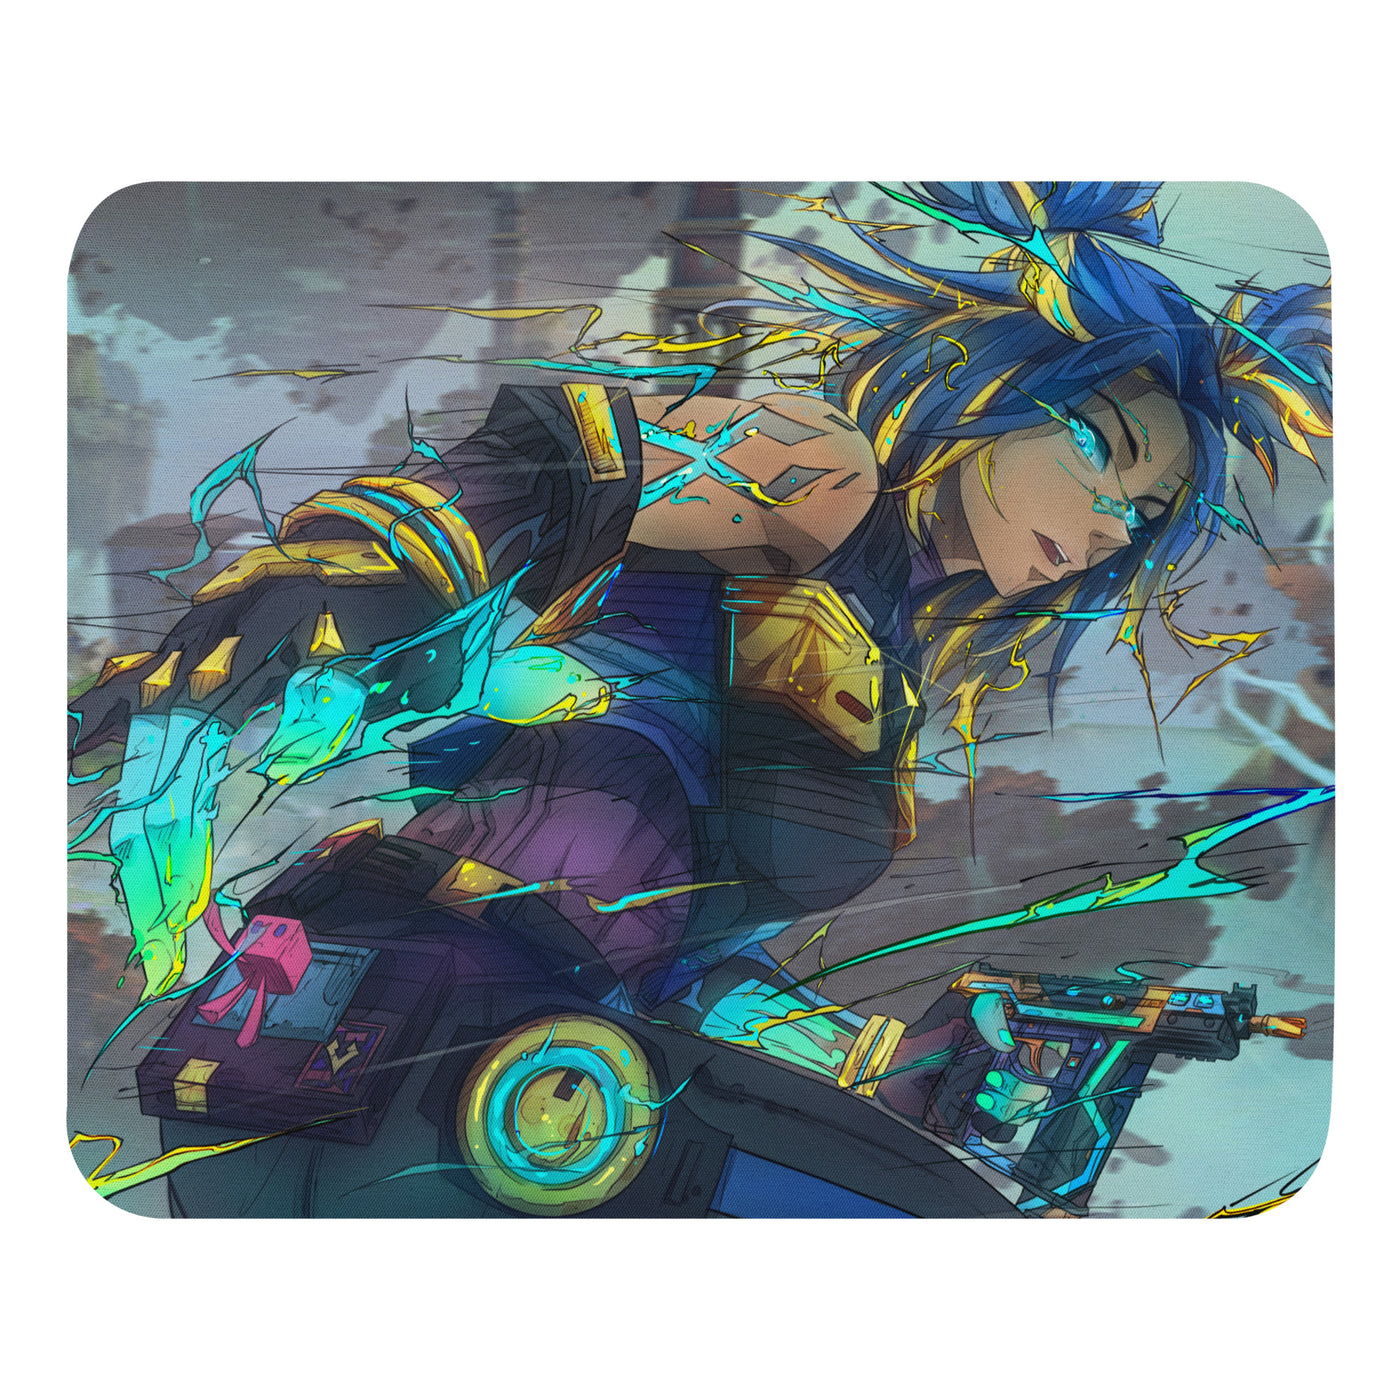 Neon from Valorant Mouse pad